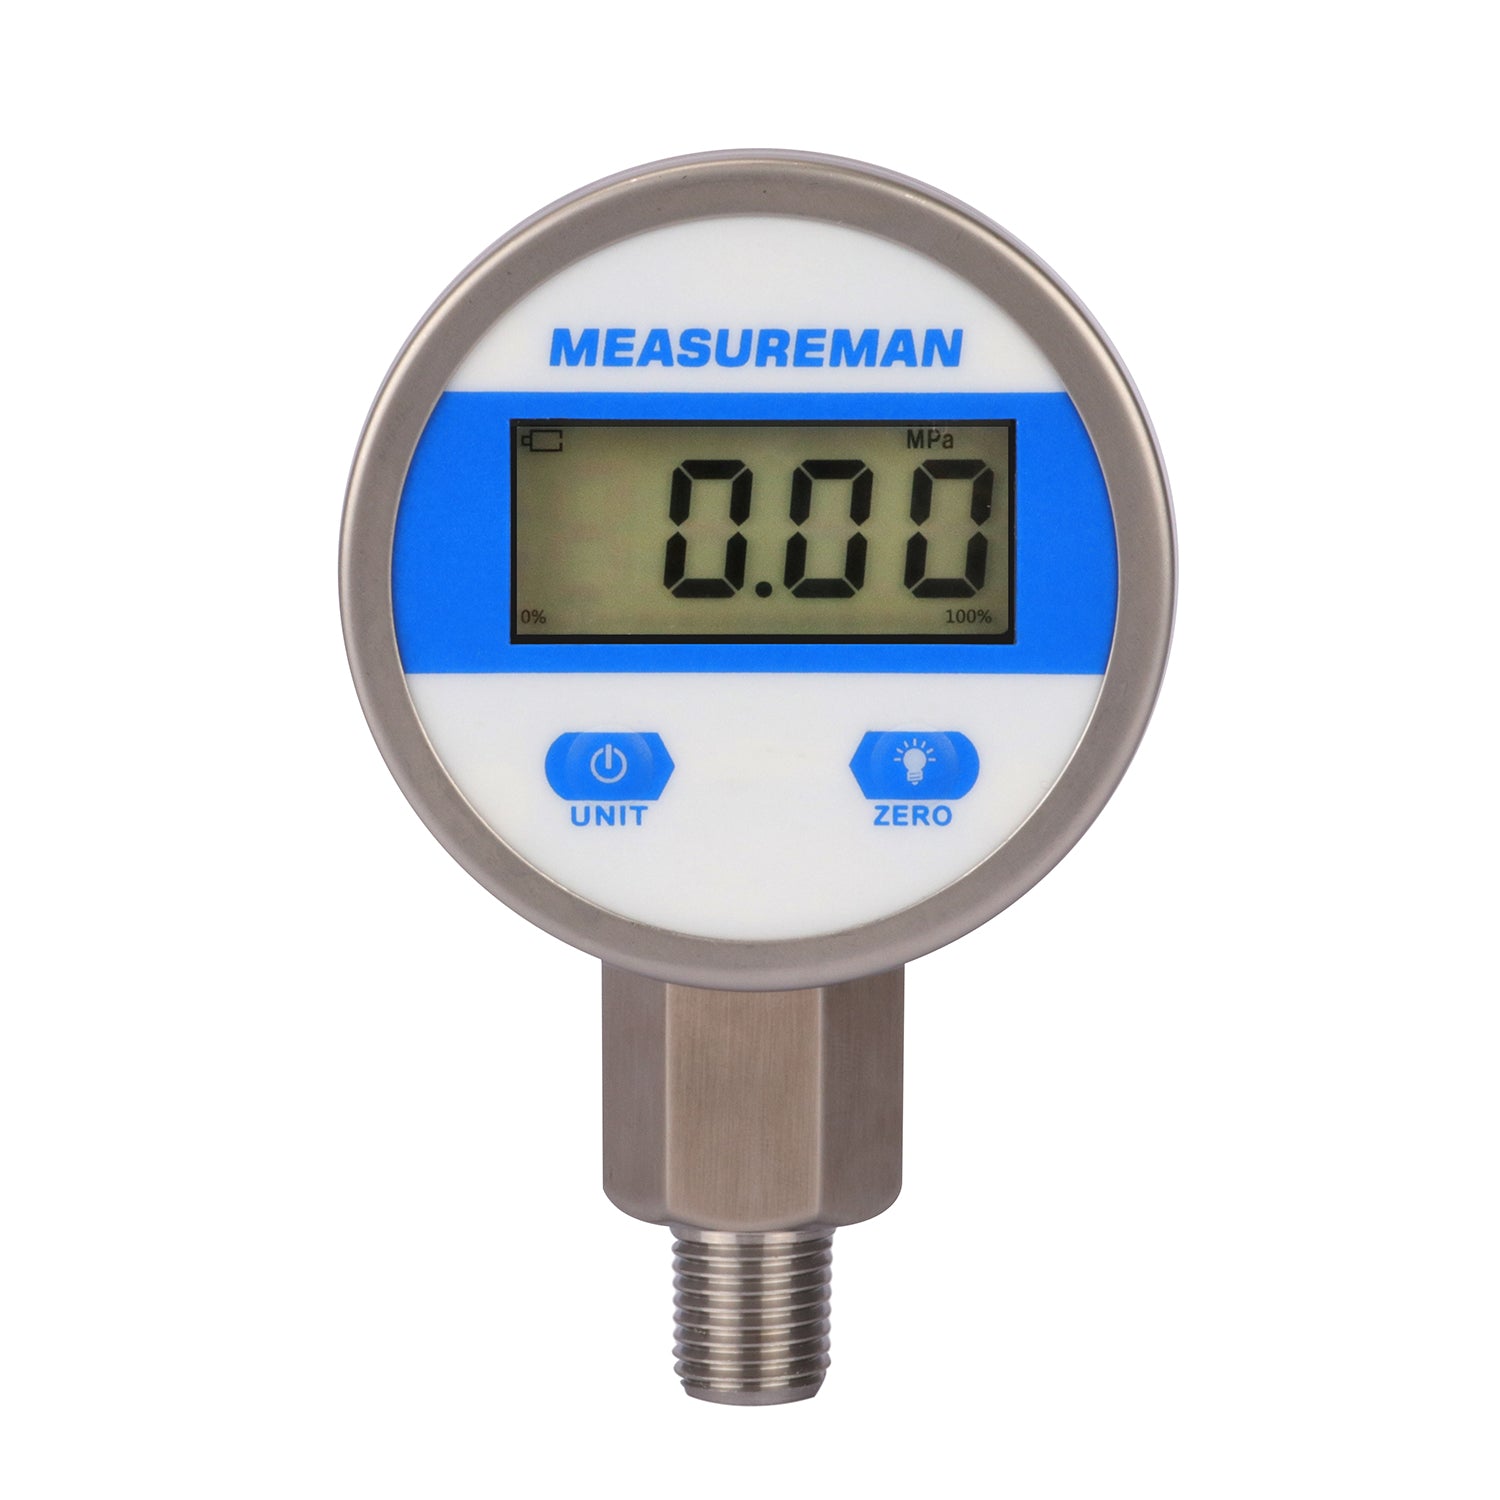 MEASUREMAN Digital Hydraulic Industrial Pressure Gauge 2-1/2 Dial 1/4NPT Lower, Stainless Steel Case and Connection, 0-3500psi/bar, 1%,Battery